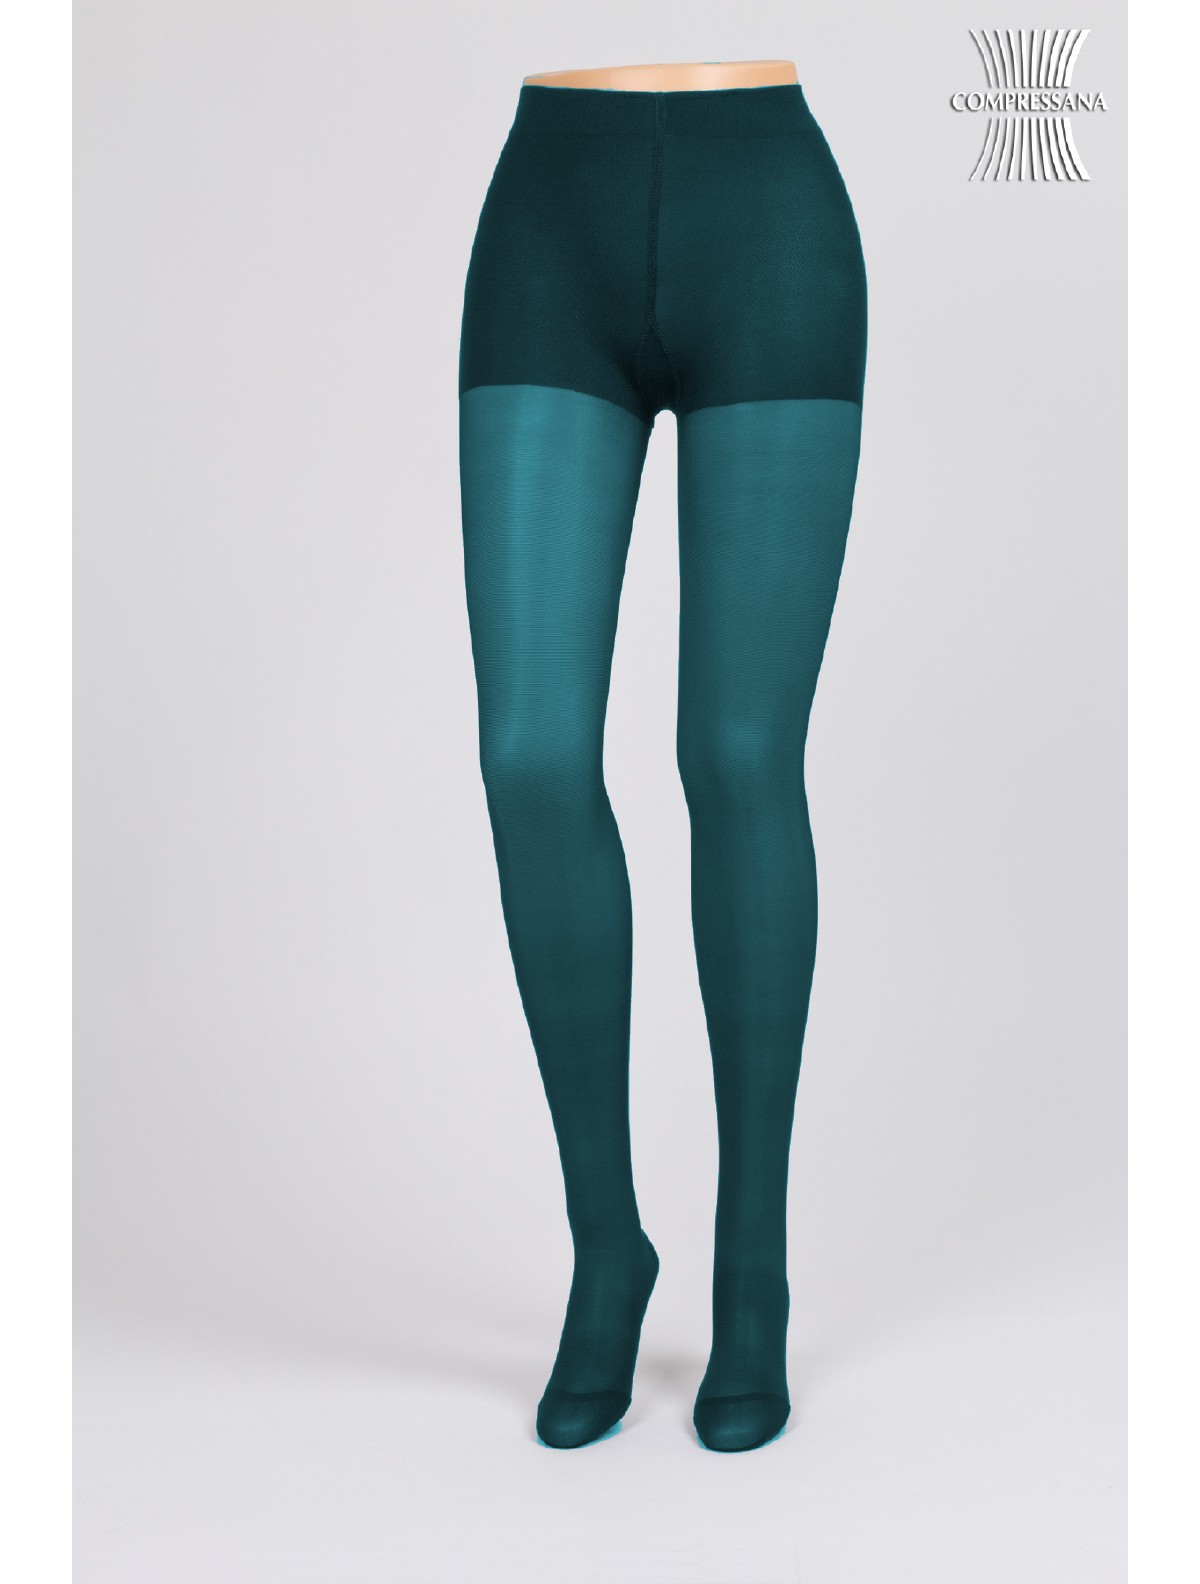 Tights Support 140 Calypso Strong Compressana